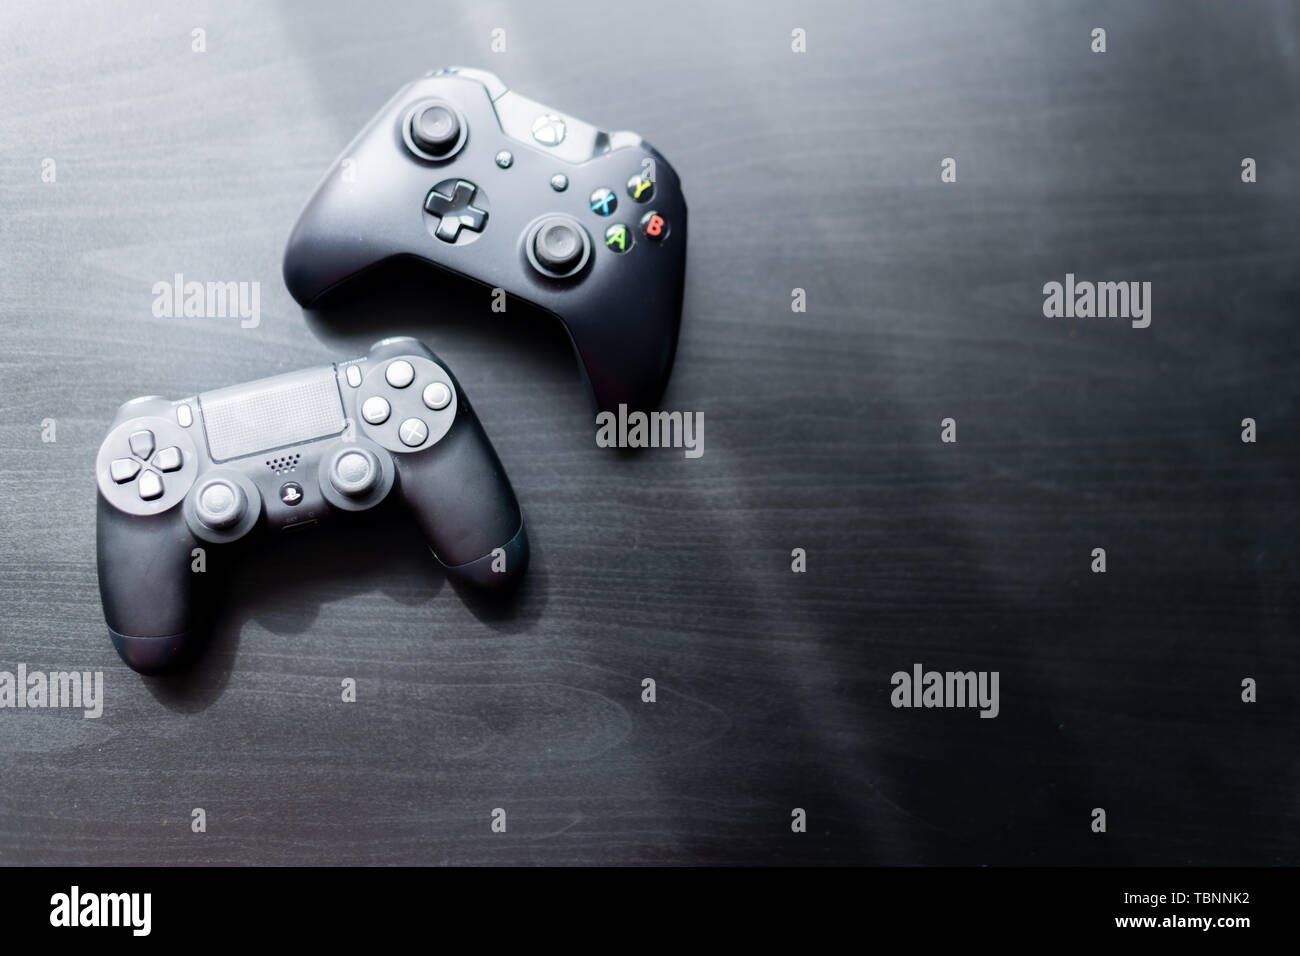 Xbox and Playstation controller sat next to each other on a dark background Stock Photo